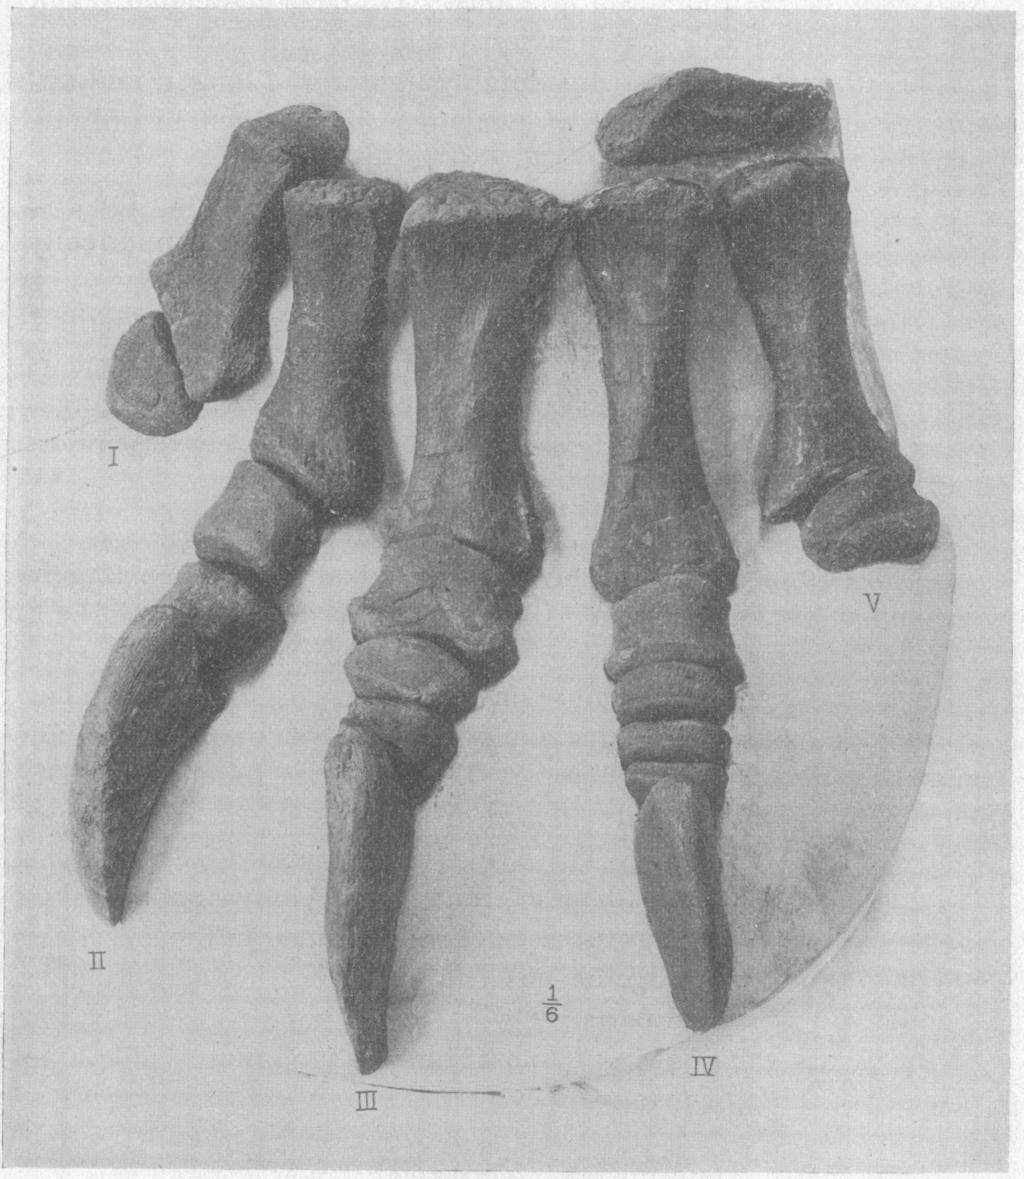 I899.] Osborn, Carnivorous and Herbivorous Dinosaurs. 7 I The large fore foot (No. 268) was found with the metacarpals in position, and the phalanges scattered.